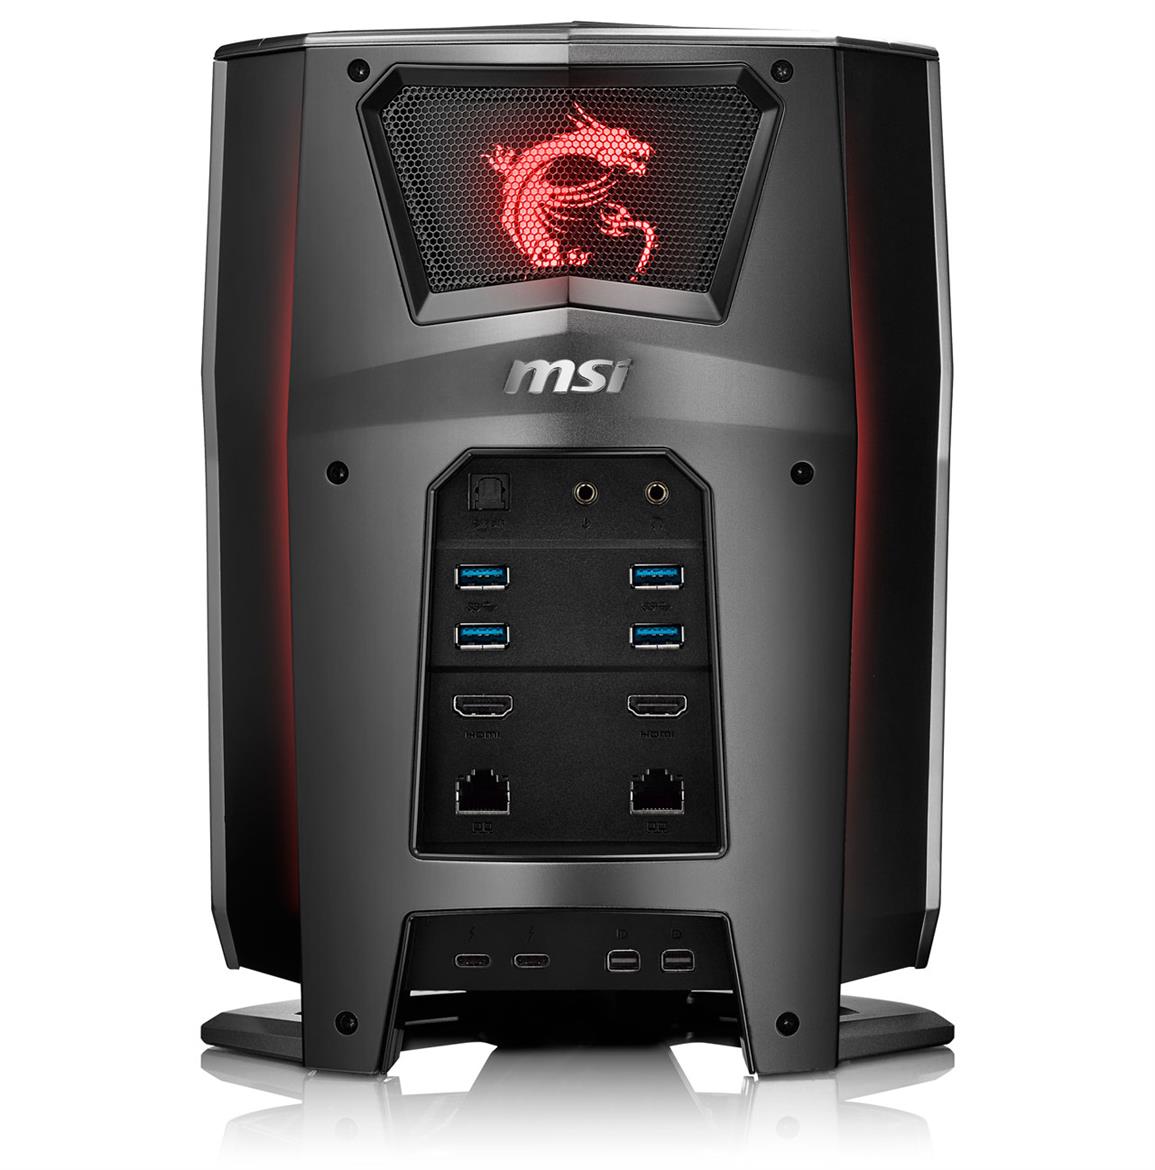 MSI Outdoes The Cylindrical Mac Pro With Ultra Powerful Vortex Small Form Factor PC